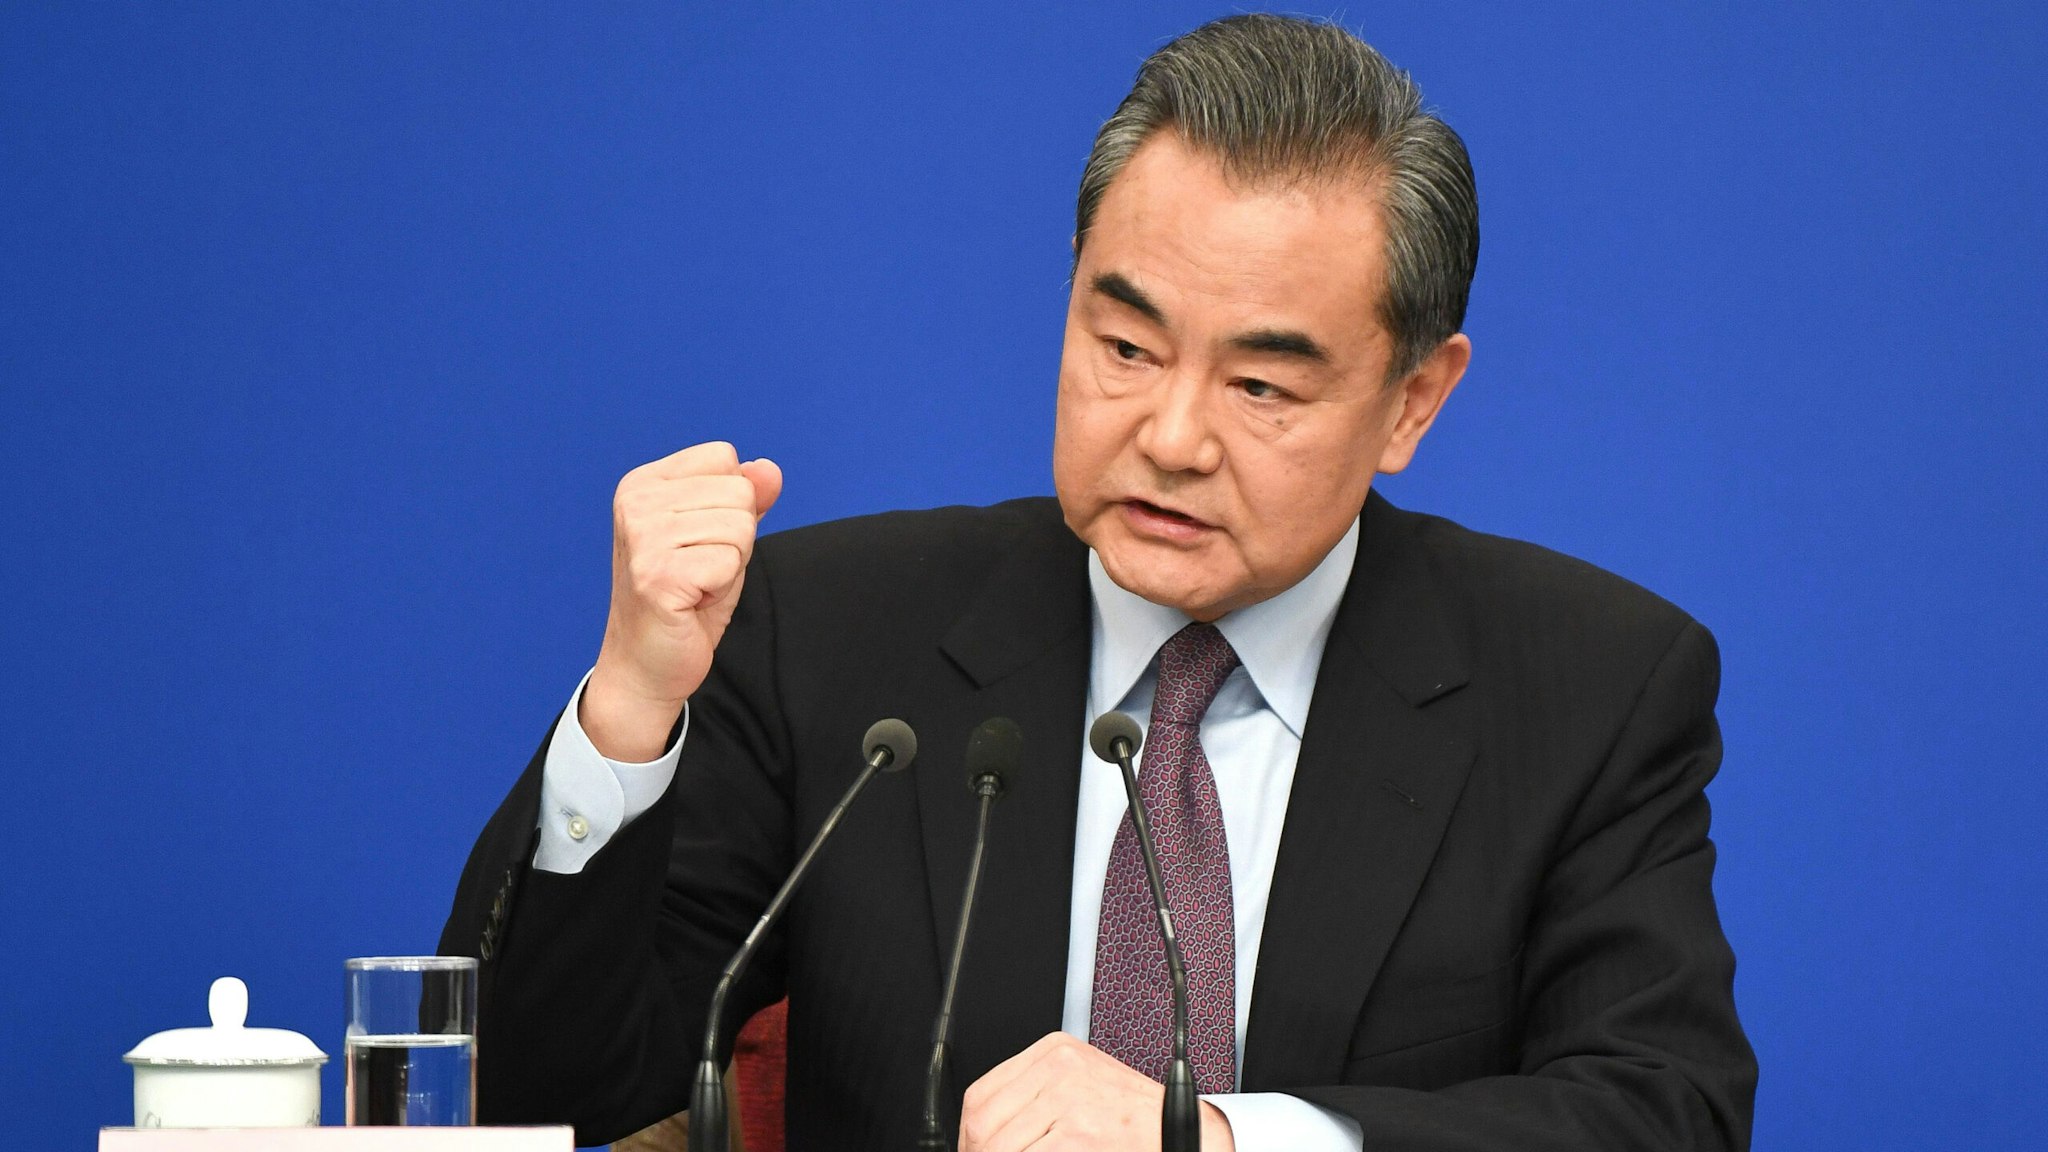 TOPSHOT - China's Foreign Minister Wang Yi reacts as he answers a question during a National People's Congress press conference in Beijing on March 8, 2019. - China threw its weight behind Huawei's legal battle against the United States on March 8, vowing to take all necessary measures to defend the "legitimate rights" of Chinese companies and individuals.